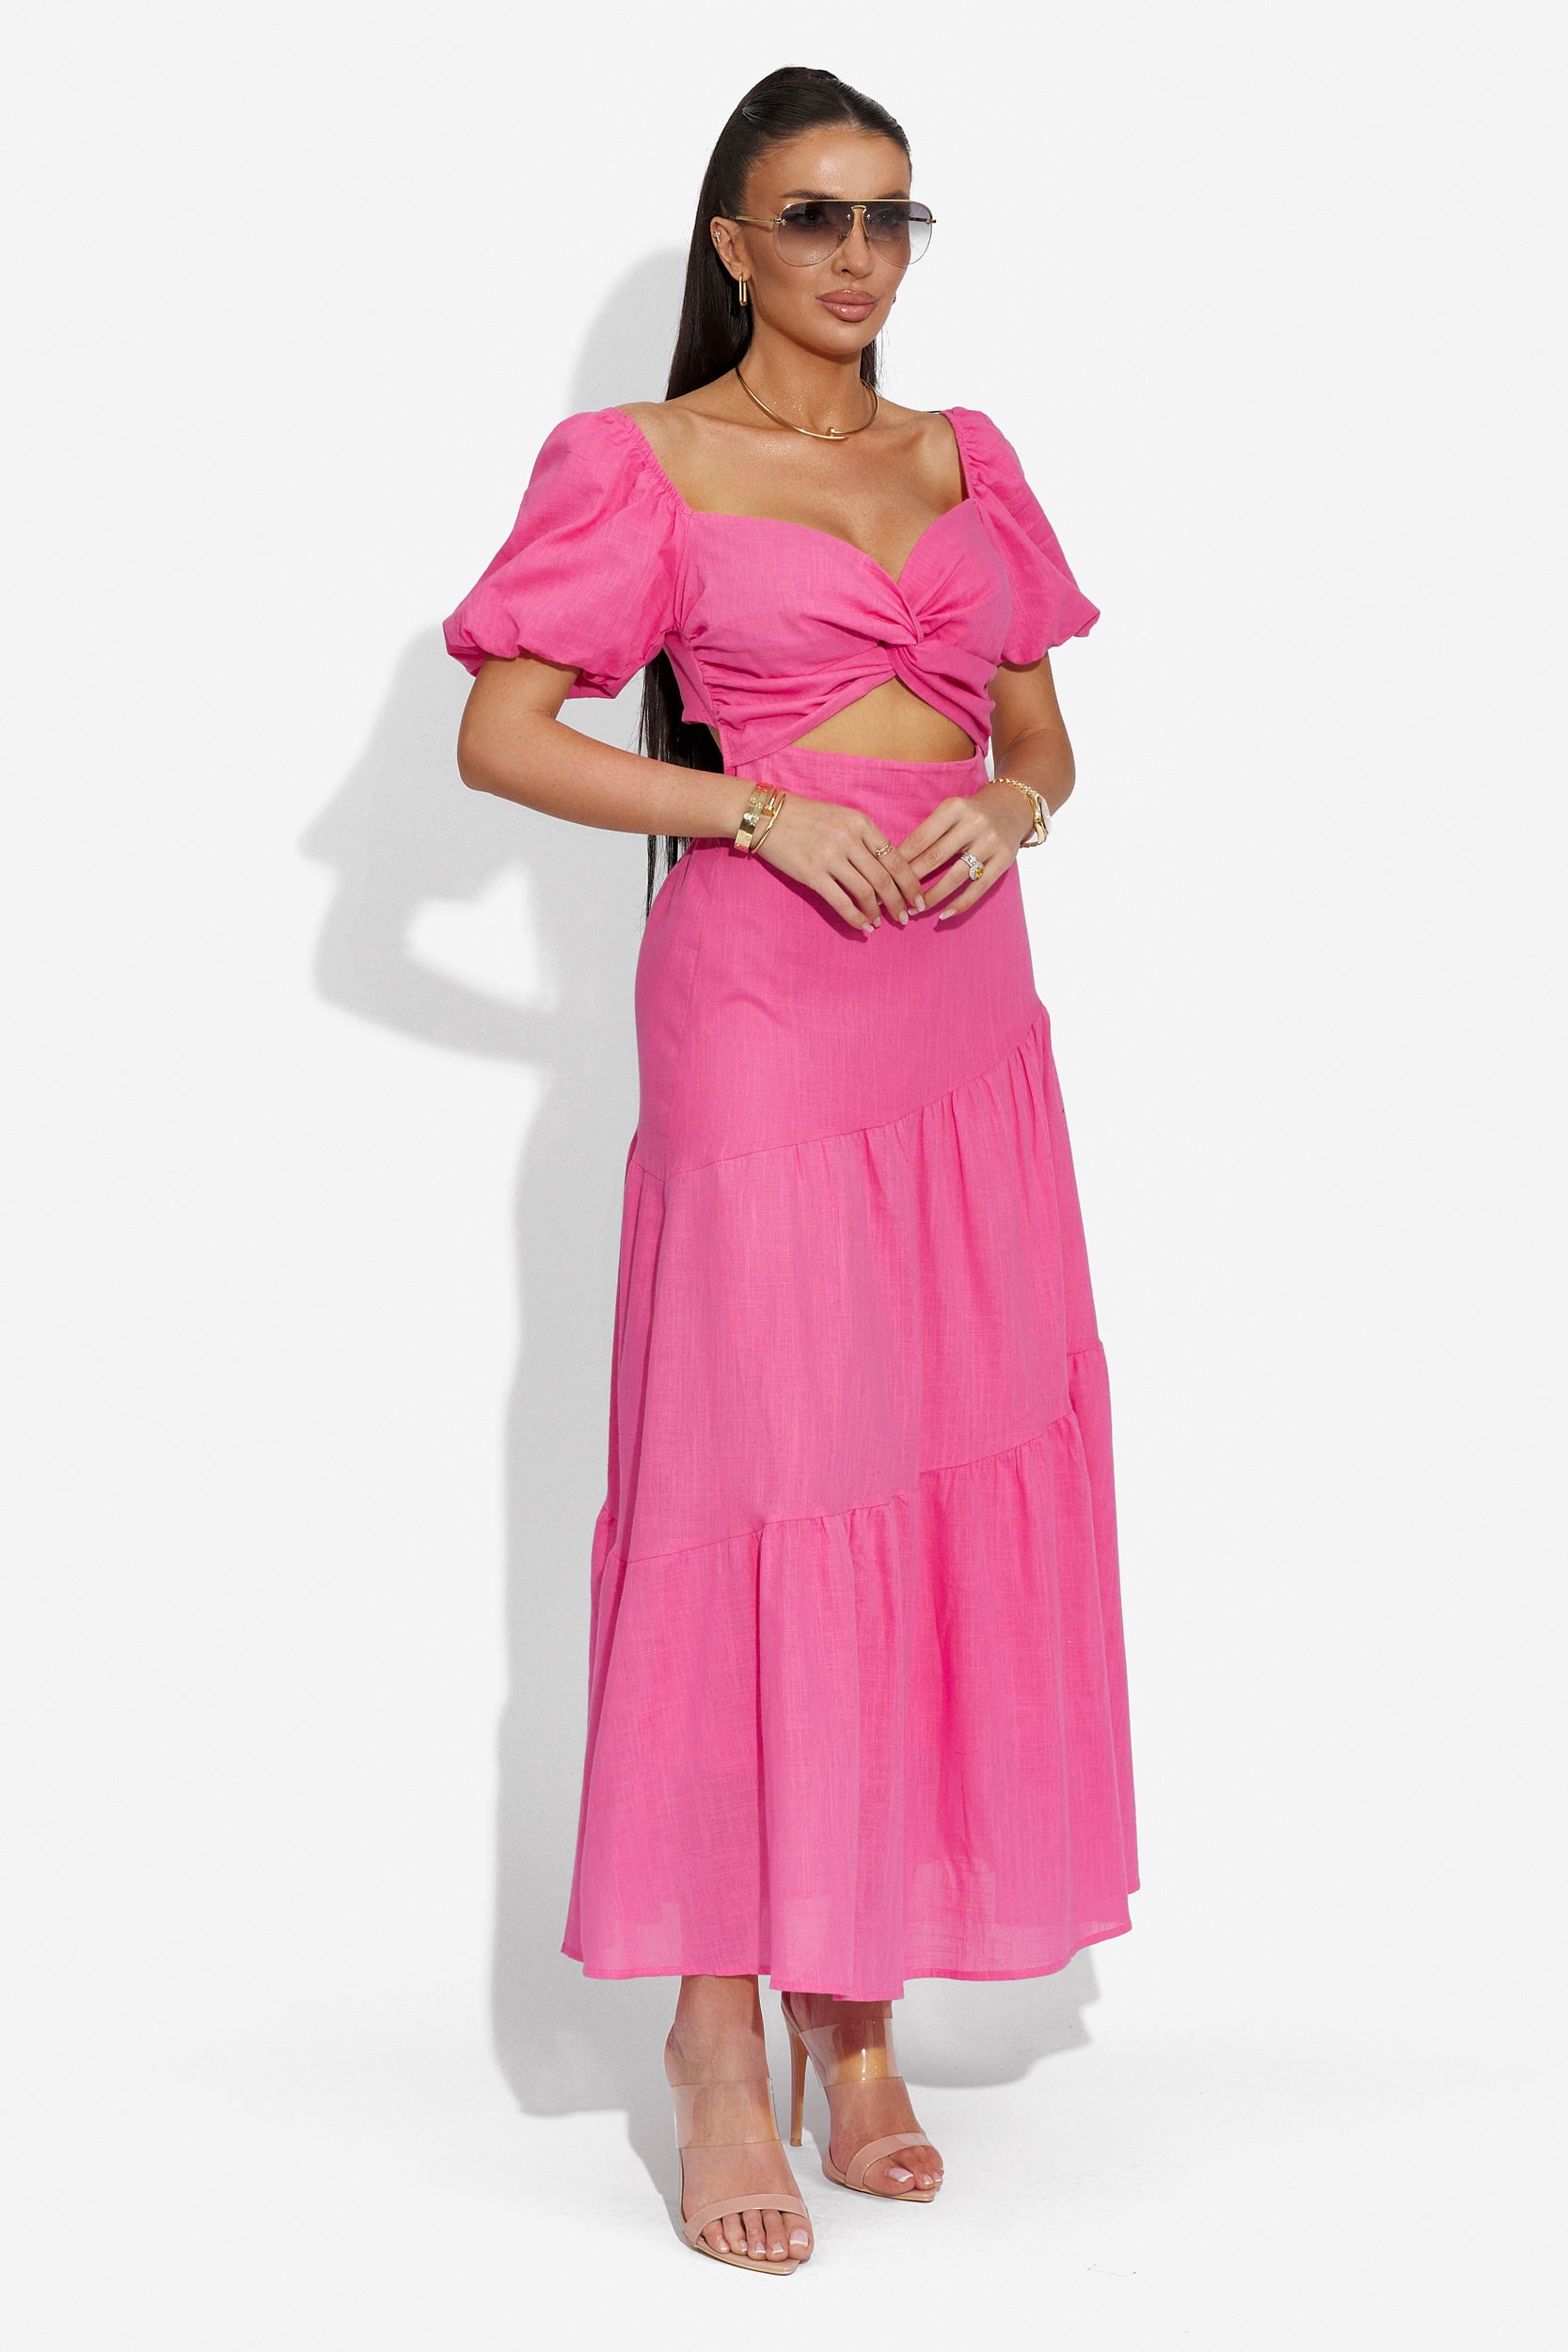 Ladies long dress pink Mosysca Bogas